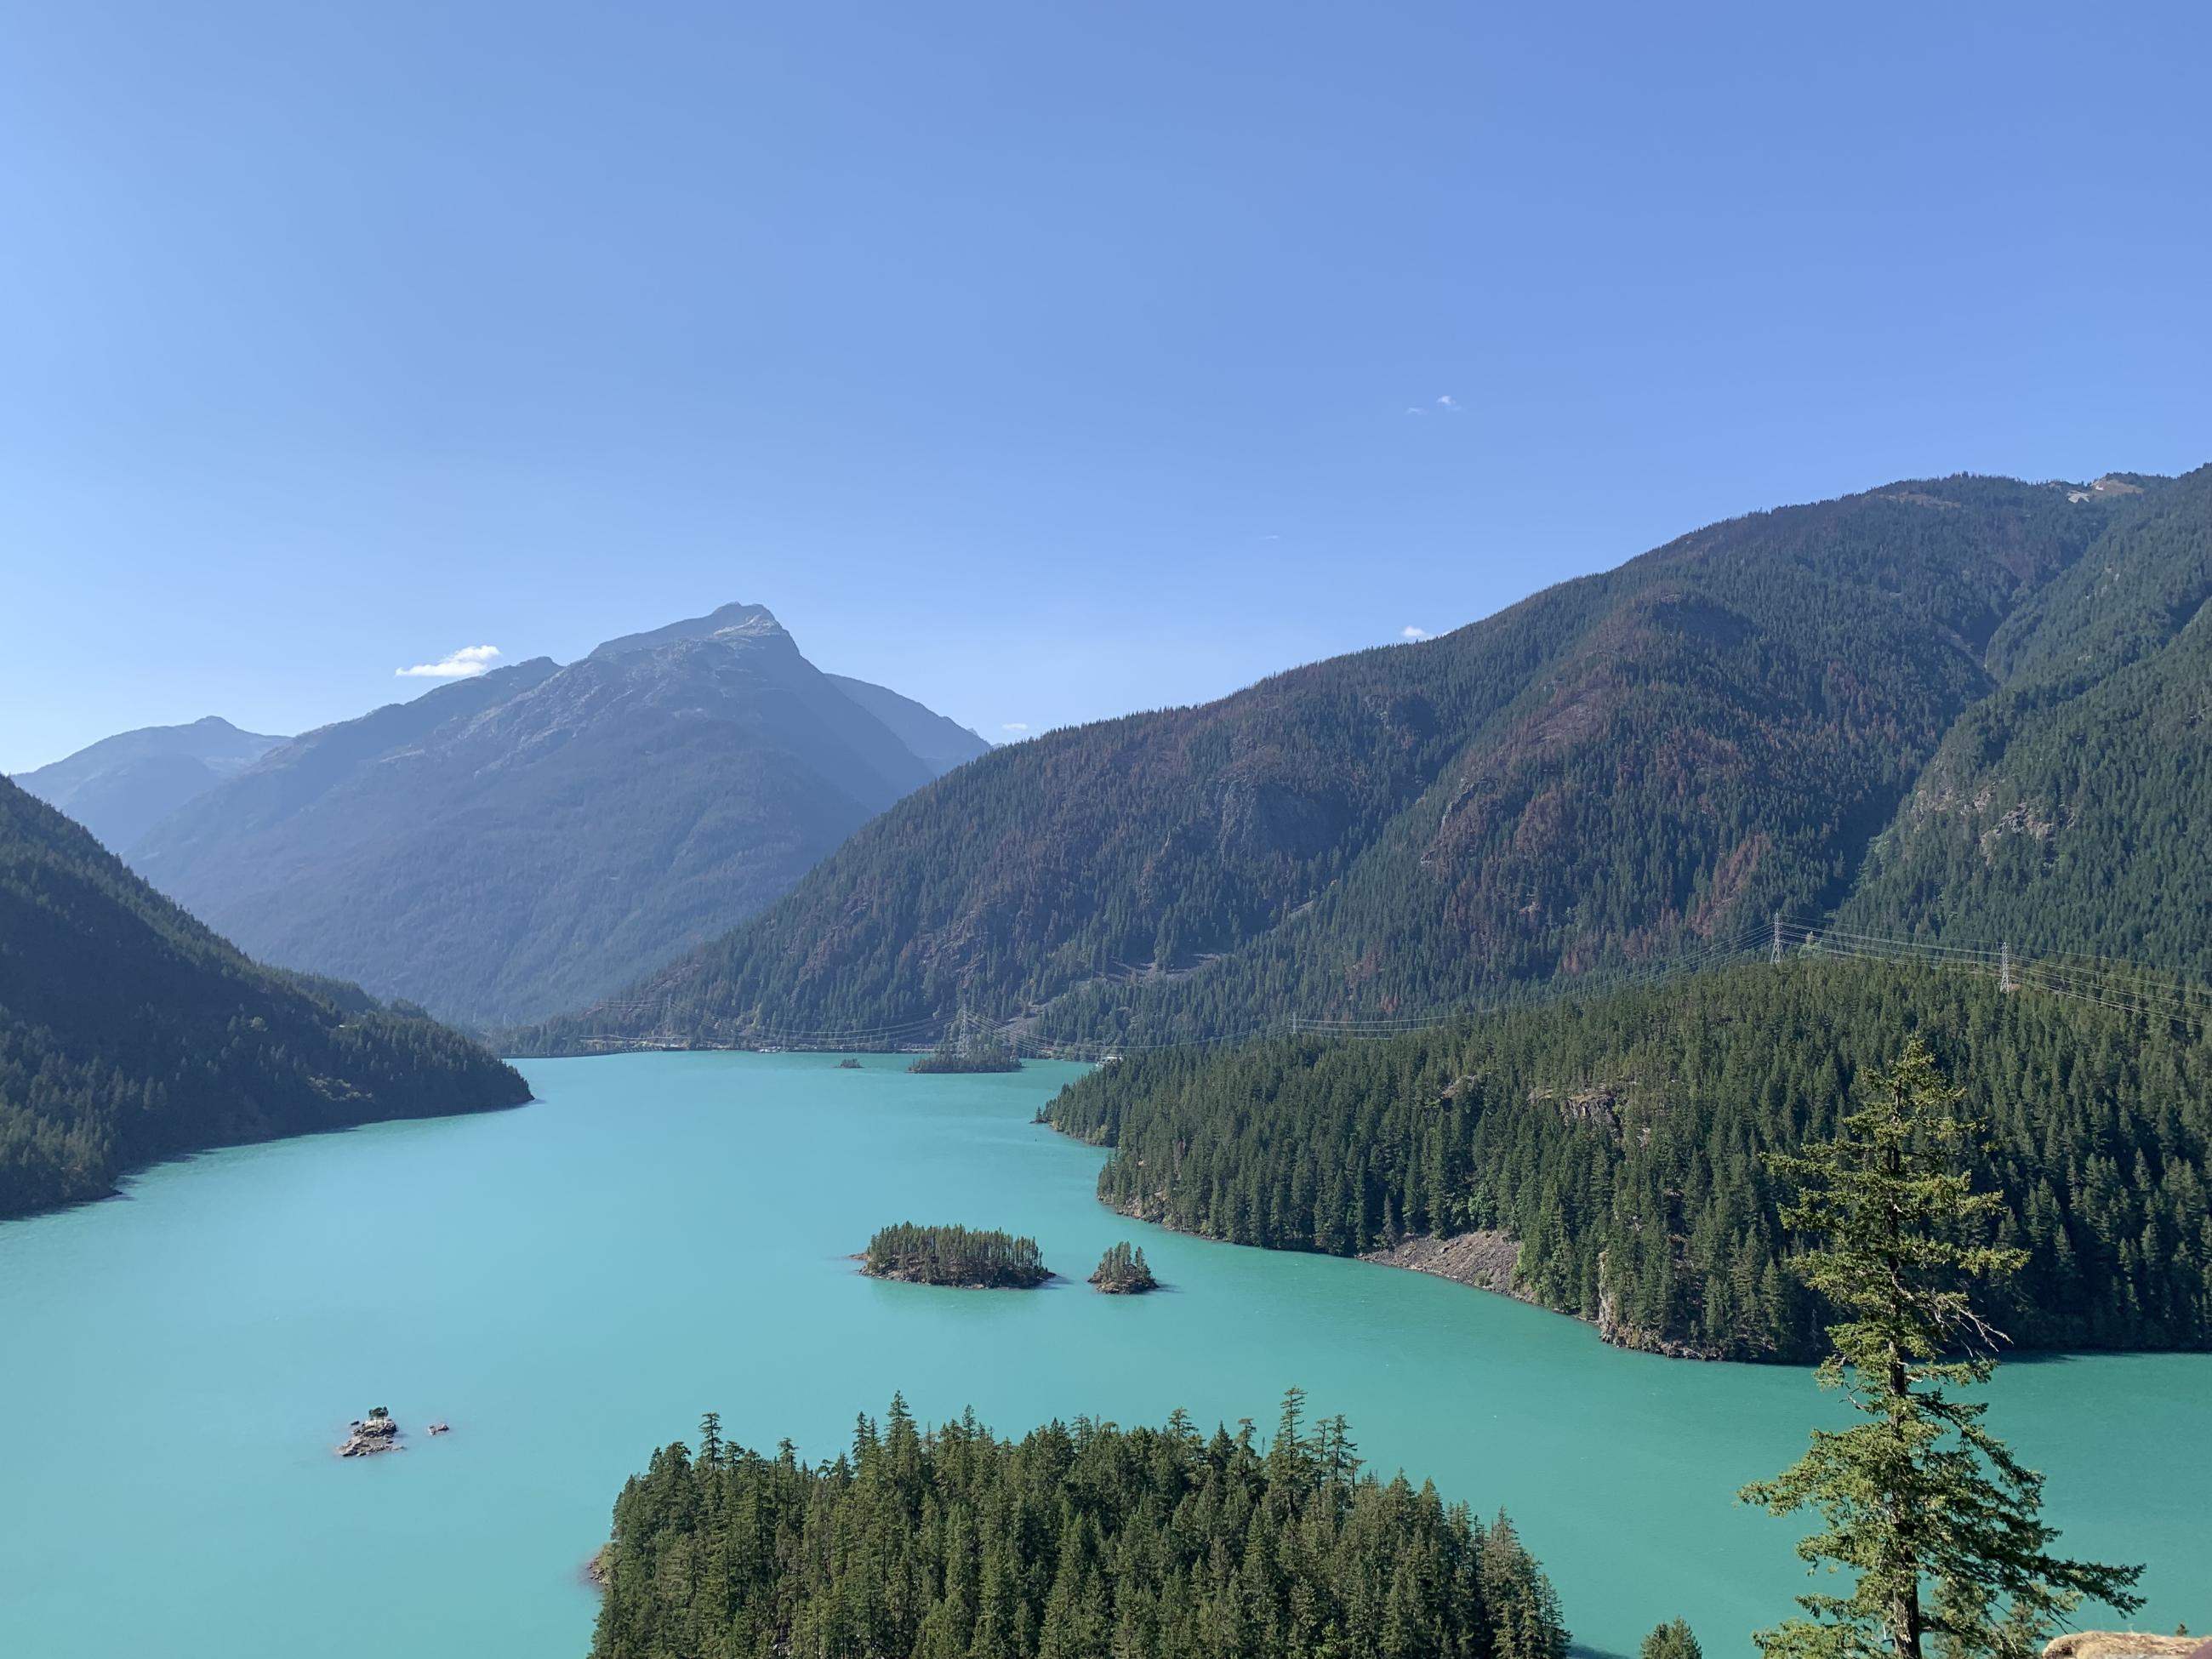 Turquoise green lake with mountains in background